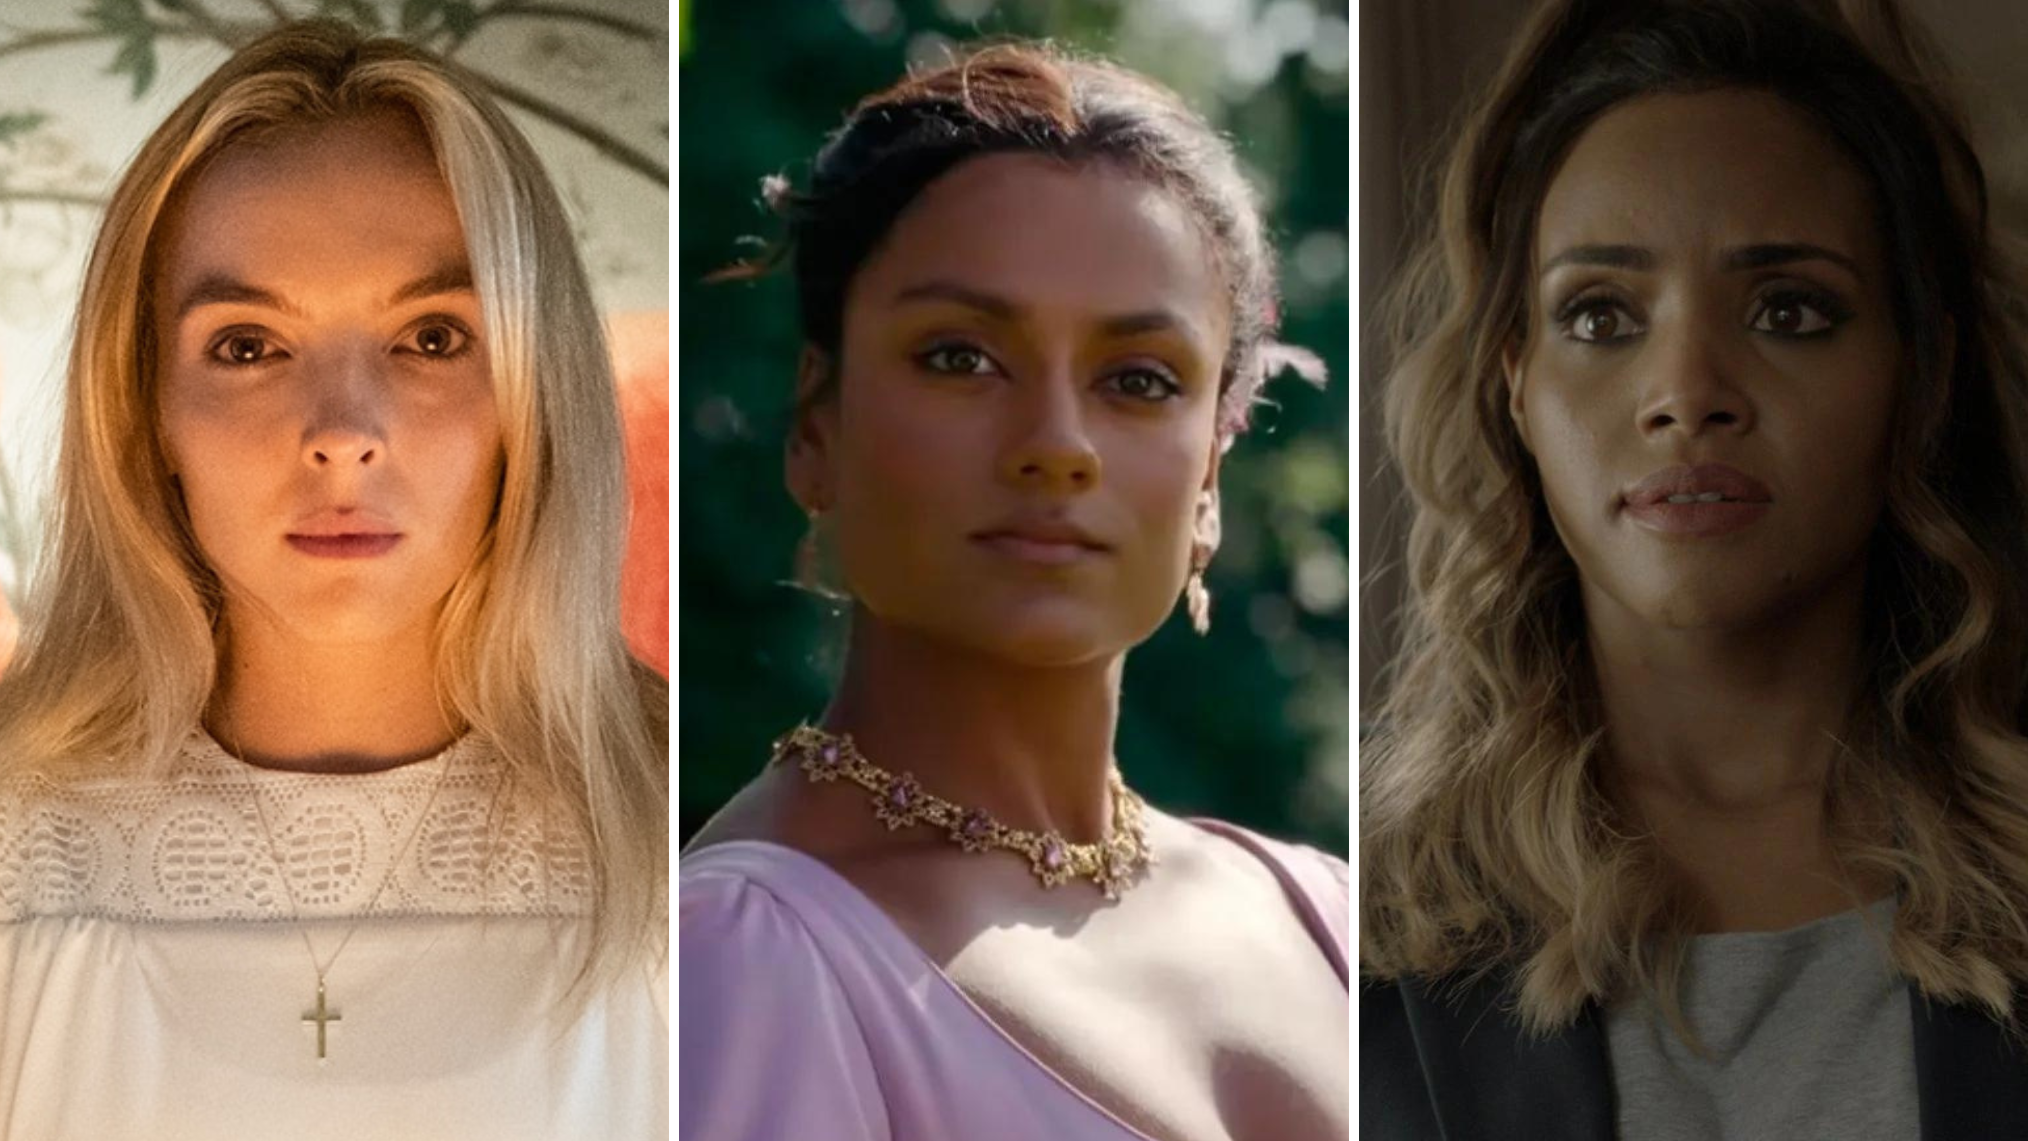 Jodie Comer, Simone Ashley, and Meagan Tandy in our Fantastic 4 Sue Storm fan cast